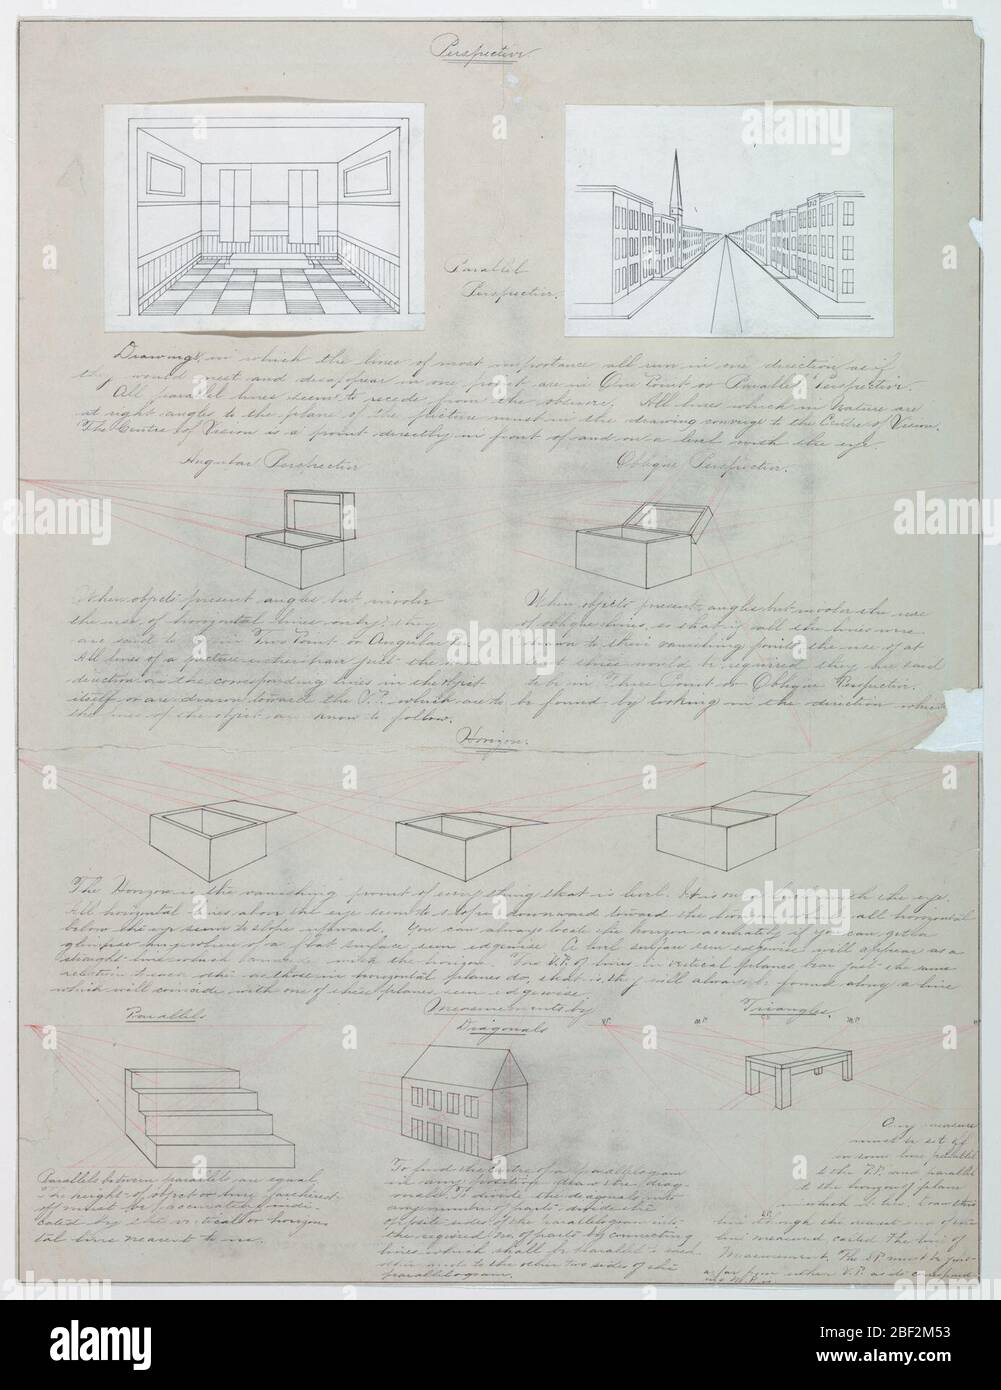 Exercises in Parallel One-Point Perspective, Black ink and red crayon on  paper (two additional sheets mounted on), Vertical rectangle. Two exercises  in one-point perspective, showing a room interior, street scene, and various